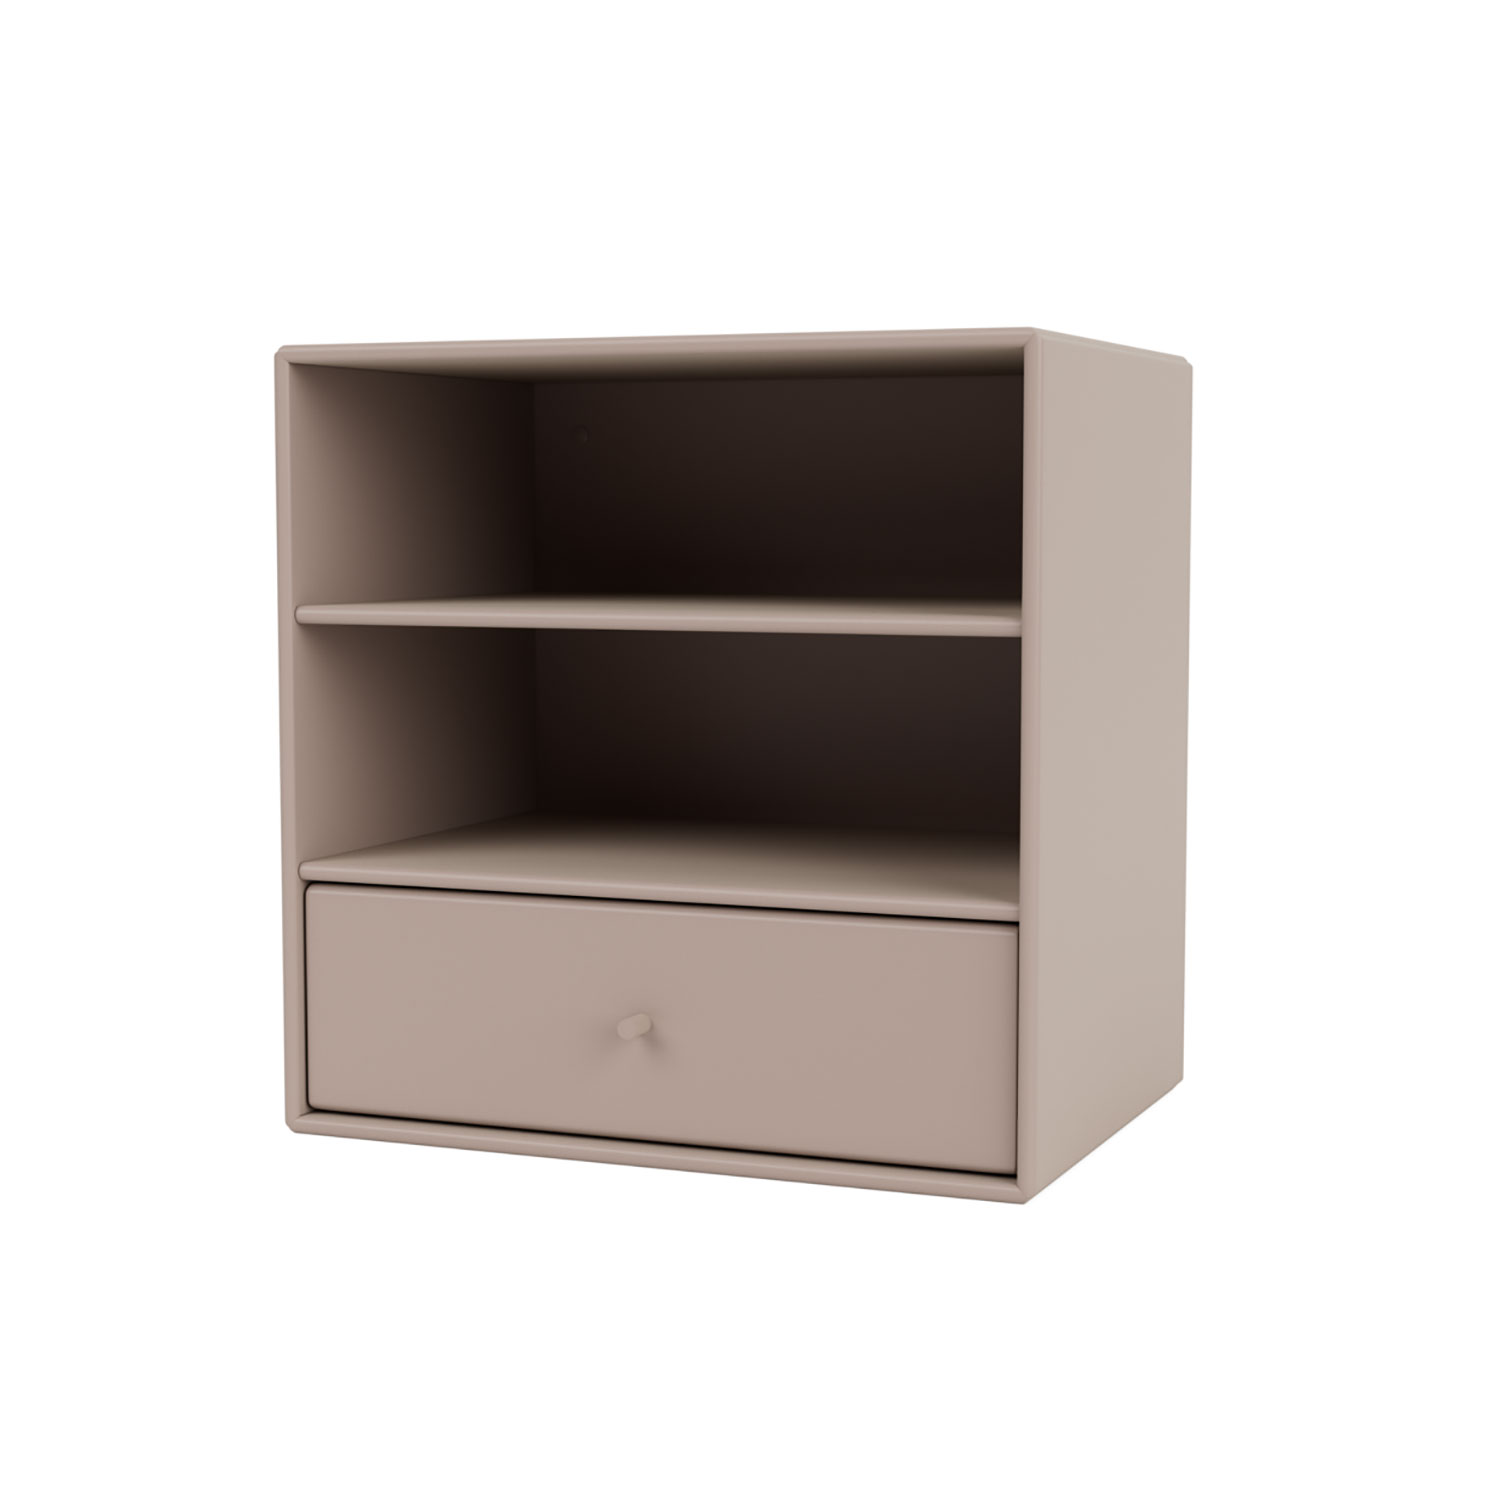 Mini 1005 with one drawer, 6 colors